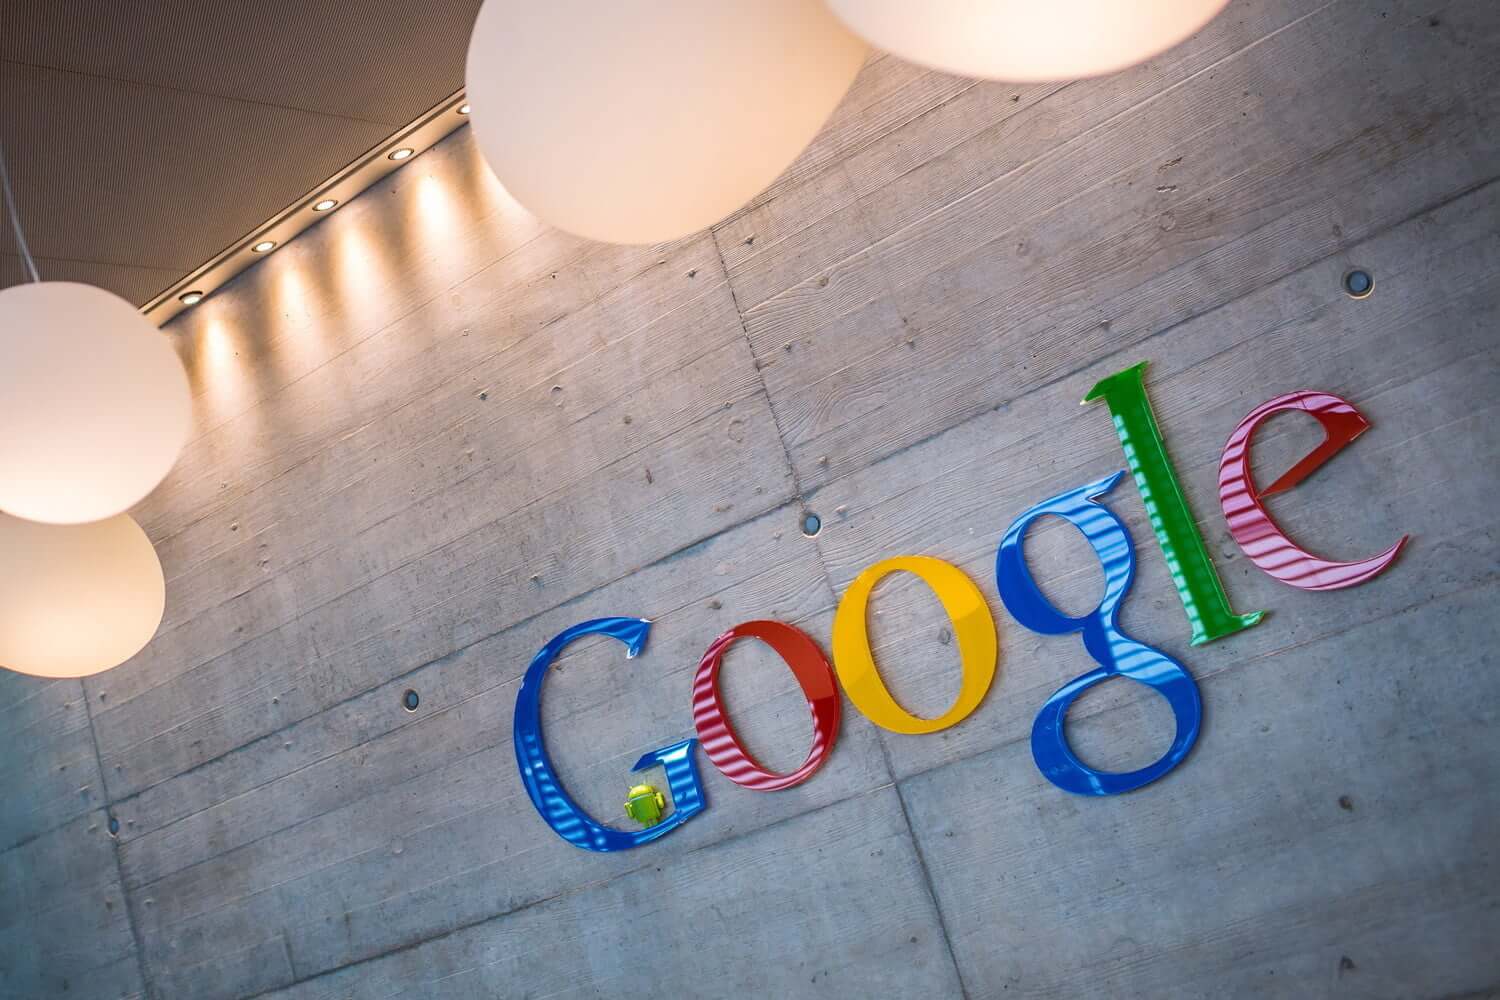 Google confirms it tracks users